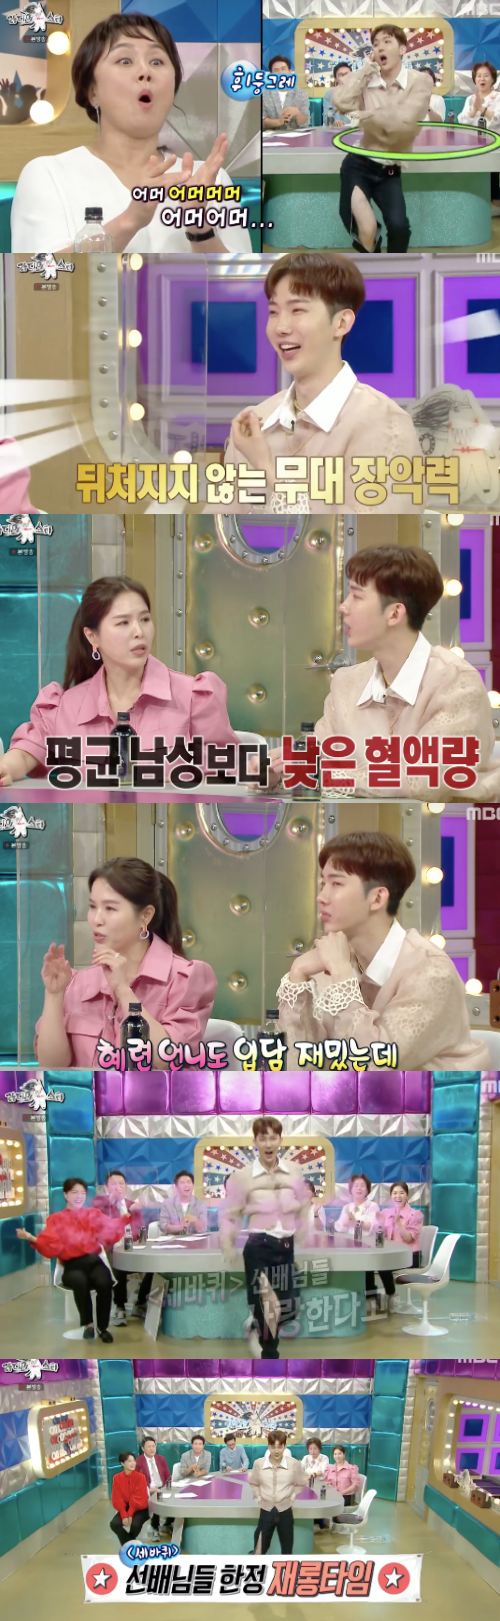 In Radio Star, Jo Kwon mentioned the 2AM comeback activity, and from the anecdote that suffered from pelvic disease due to hair dancing, he reported a sad anecdote that only Transfusion transmitted virus received 6 packs.On MBC entertainment Radio Star, which aired on the 30th, a special feature of Three Wheels was broadcast on the airCho Kwon, a blue-collar store, appeared on the day.On the 2AM return, Jo Kwon said, Everyone has been in a long gap for seven years, he said. The company is different, but we are discussing a comeback positively.I asked the members about their recent situation naturally.Jo Kwon said, Everything is good, Changmin writes and writes trots in Namyangju, and while he is a producer, Imsung is doing well, Jinwoon is doing well ... well.MCs mentioned Jinwoons farewell to his ex-lover, Kyungri, saying, How long have you been through the pain of parting? Jo Kwon said, Is not it a concept that we have all accumulated?Jo Kwon also commented on the illness that occurred during entertainment, saying, There was no good place to be on a schedule, I was surprised to hear that my pelvis was twisted and my body was not blood when I went to the hospital.At some point I was dizzy, usually less blood than men, and only about six packs of transfusion transmitted virus, Jo Kwon recalled.Jo Kwon, who has now been healthy after receiving the therapy and Pilates, said, I have prepared a new close dance. He made a joke time for his seniors and transformed the Brave Girls Rollin into a friendship.Before Corona, when I went to the club, people lined up to try to get me and my pelvis, he said, referring to the Battle that challenged the character.Jo Kwon also recalled the song ANIMAL, saying, It is a song that is so exciting that SNS explosions.This song was featured by BTS Jay Hop before his debut.Jo Kwon reported that he was running back charts in almost 10 years abroad, including the Middle East, and said, I wore 19.5 centimeters of heels and went to a bogging dance like a fashion magazine at the time. He also showed maturity after he went to the army, saying, I felt something special, not unusual.Jo Kwon, who said that there was a regrettable choice, said, At that time, 2AM was JYP, but when I was working as a double agent with Big Hit, I was hit by the I can not send you dead written by Bang Si-Hyuk and asked about my future when I signed a contract with Big Hit.I wanted to be active only in one company at the time, so I went back to JYP, which was a long-time trainee, and now I regret it, the biggest building in Yongsan is a big hit, but now I can not even contact Bang Si-Hyuk, Jo Kwon said.Finally, Jo Kwon, who prepared a dance for his sisters, set up a stage for the dance with a dazzling close dance until the end, and after the dance, he burned his passion enough to hear that the lips were blue.Radio Star Capture